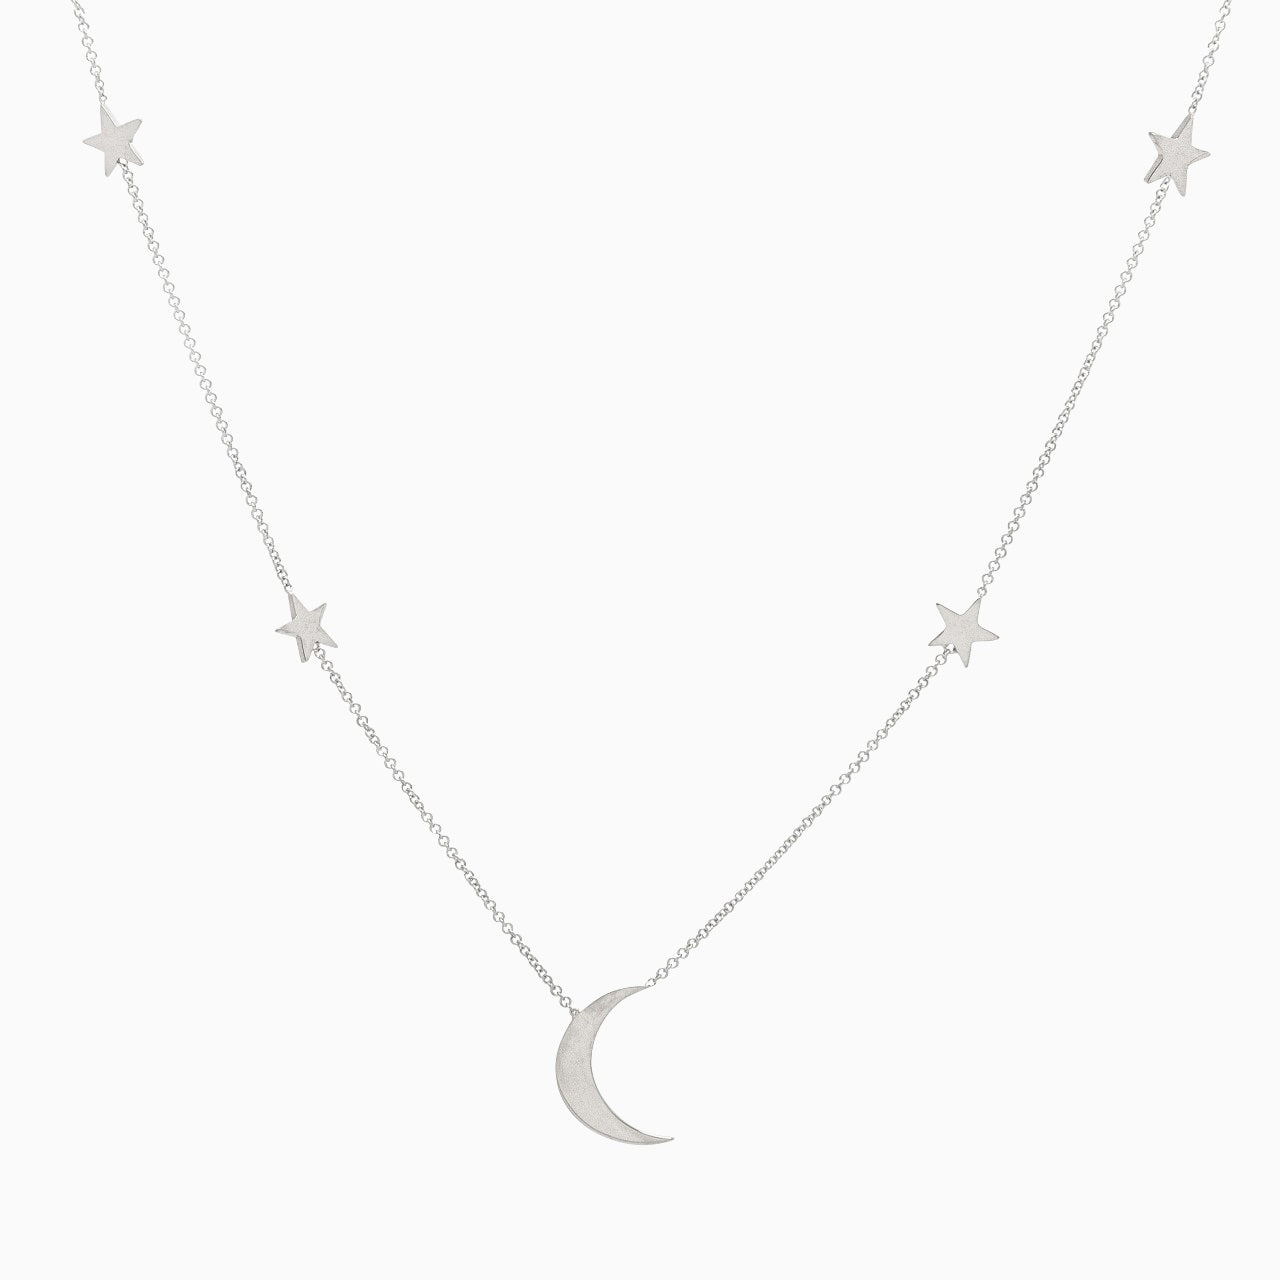 14k White Gold Shoot for the Moon Station Necklace